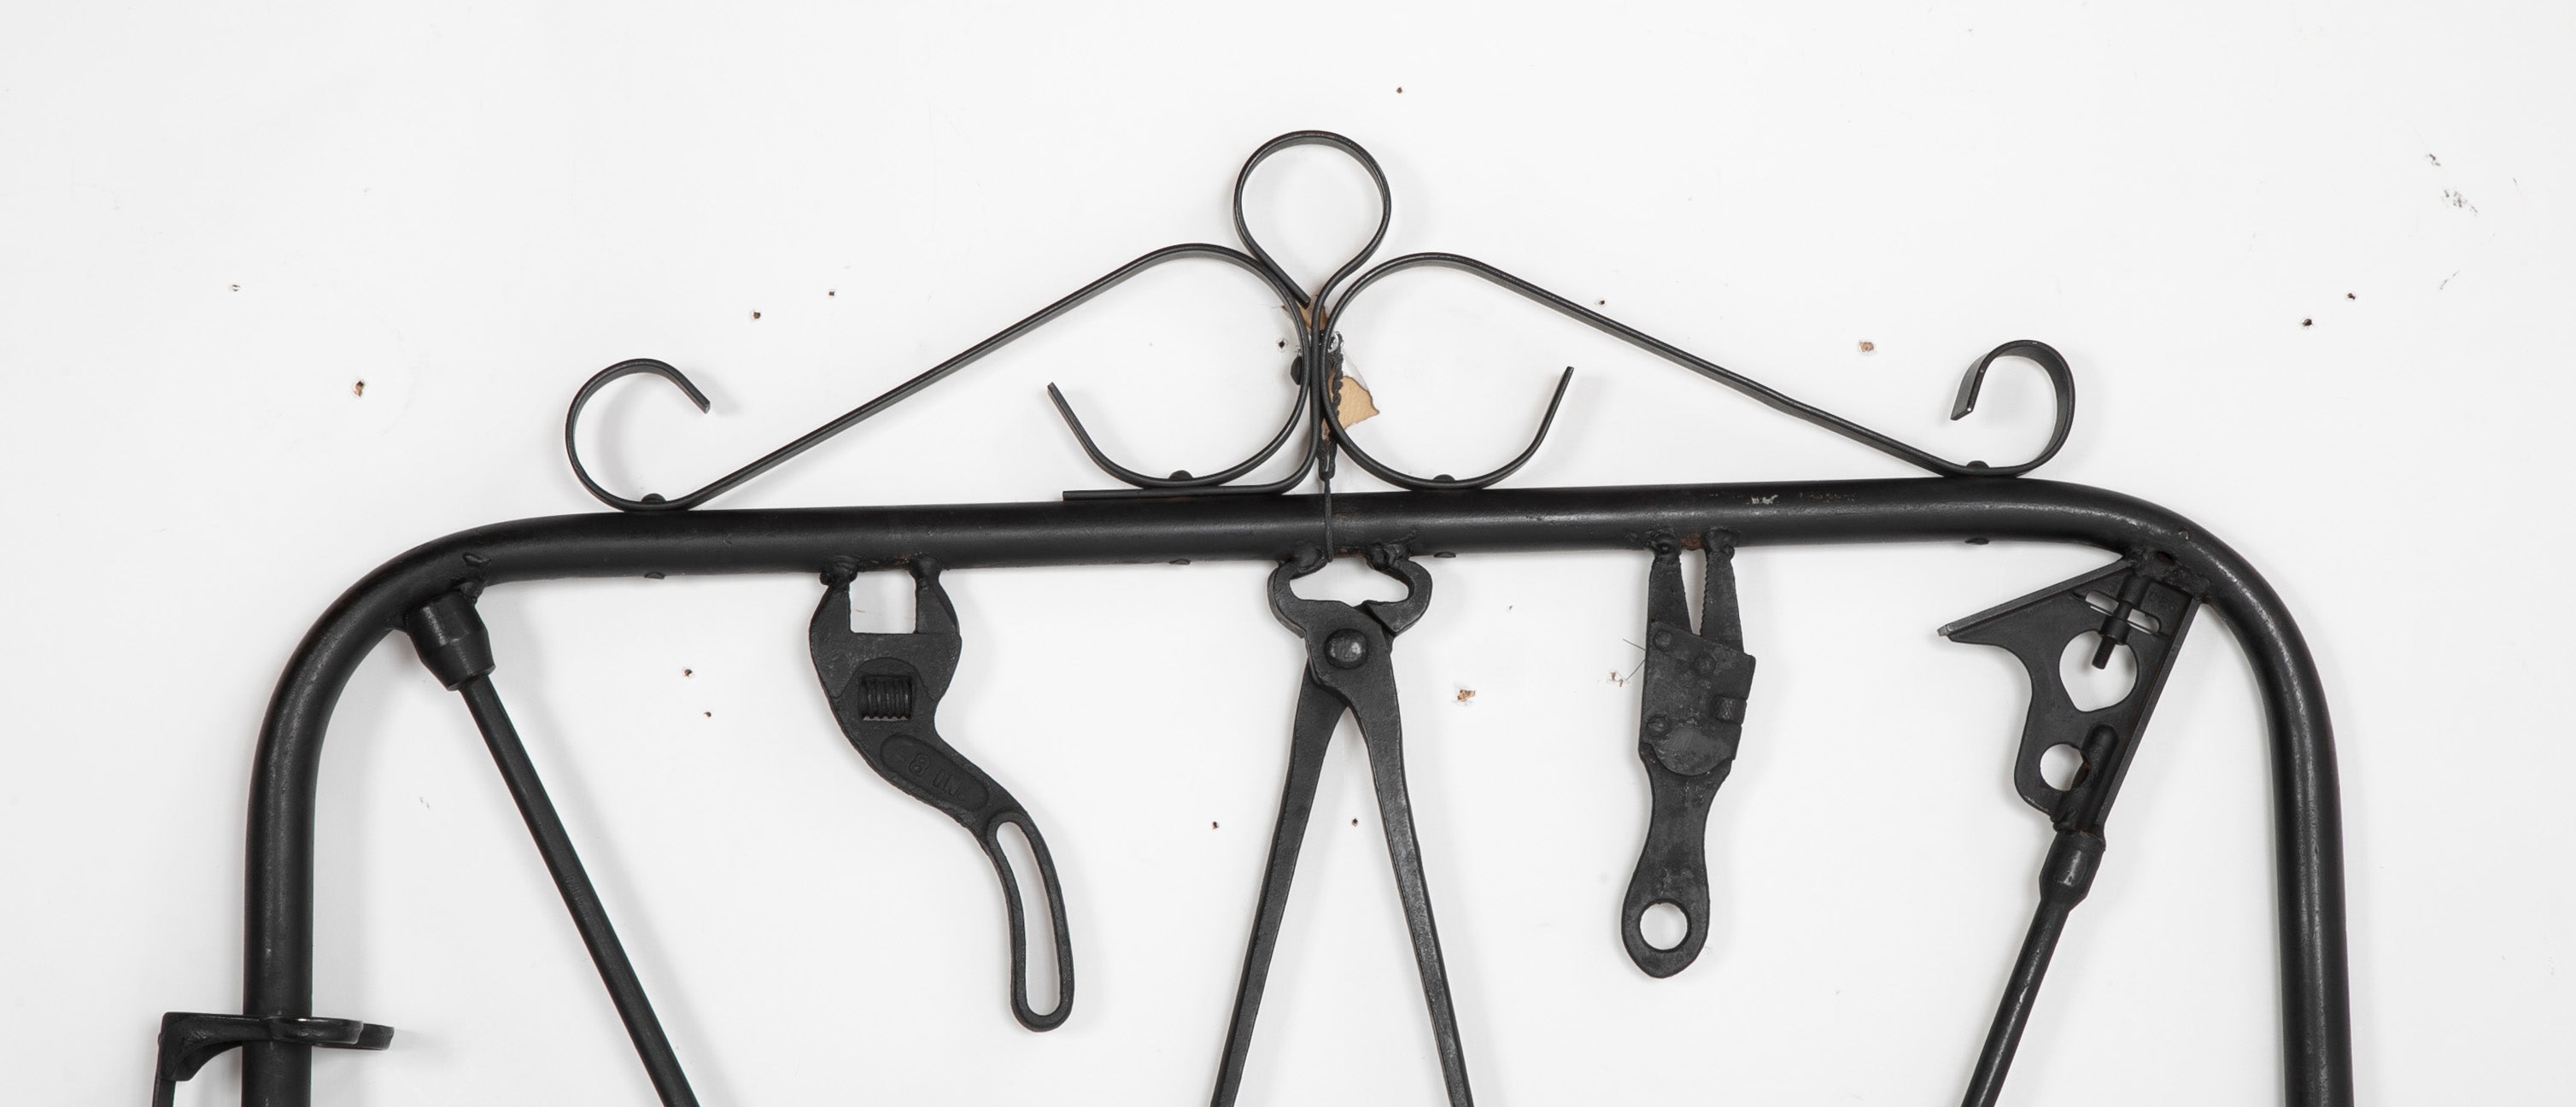 A Garden Gate in Wrought Iron with Antique Farm Tools by Rodney Rosebrook